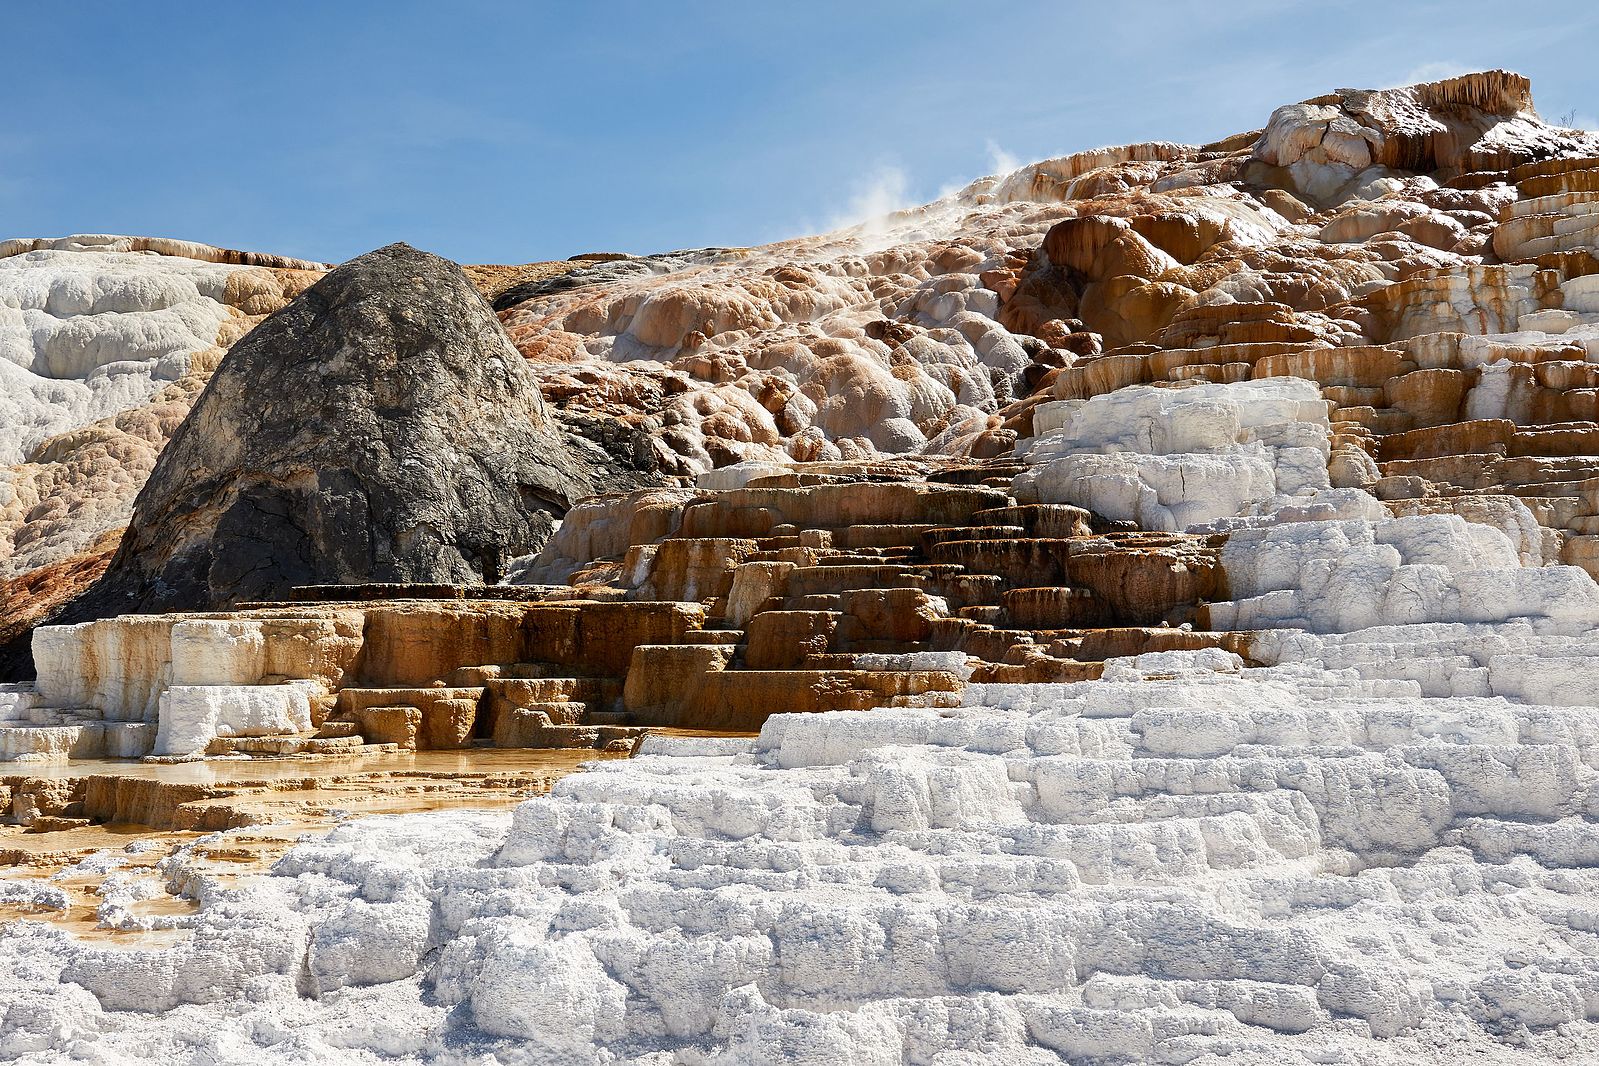 The white and brown natural steps show the formation of travertine.